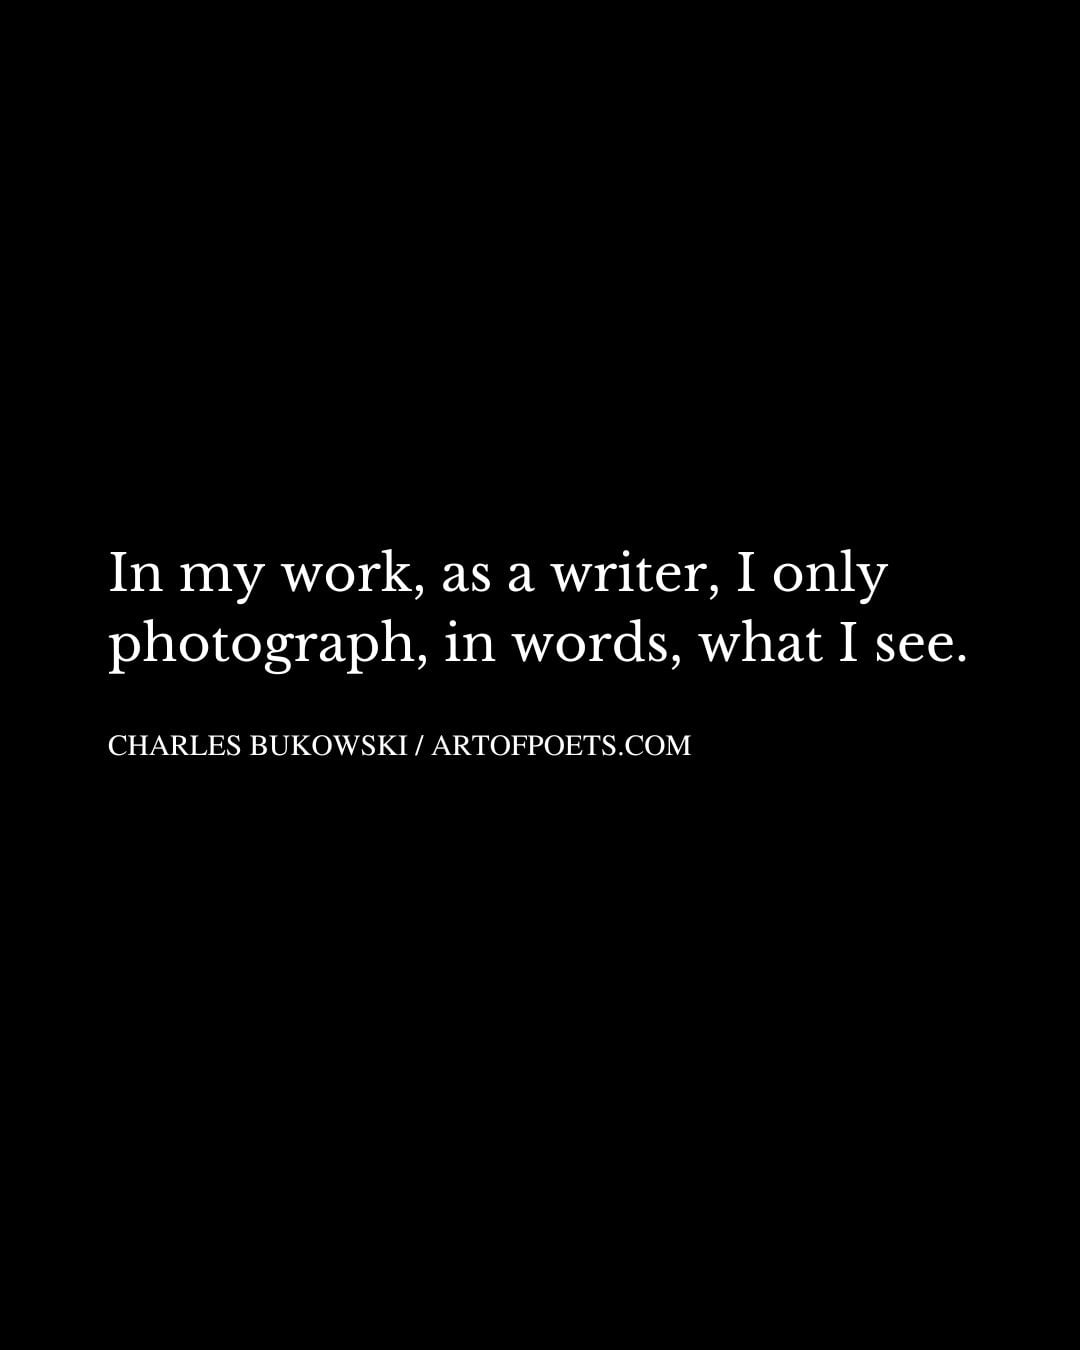 In my work as a writer I only photograph in words what I see